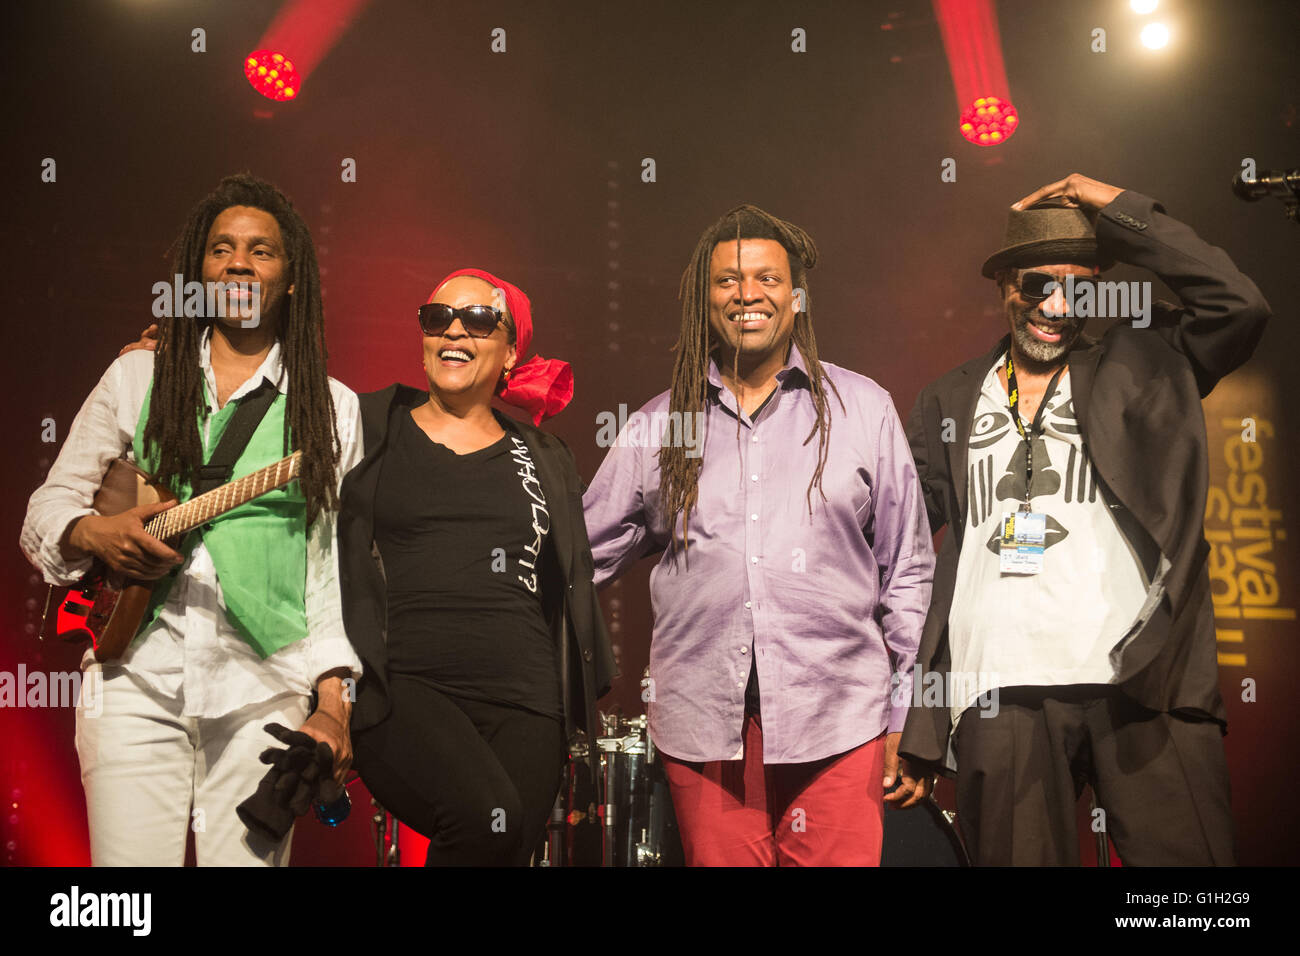 Moers, Germany. 14th May, 2016. American singer and guitarist Cassandra Wilson stands on stage with the band Harriet Tubman (Brandon Ross, Melvin Gibbs, J.T. Lewis, L-R) at the Moers Festival in Moers, Germany, 14 May 2016. The long-standing festival for improvised music continues until Pentecost Monday. Photo: BERND THISSEN/dpa/Alamy Live News Stock Photo